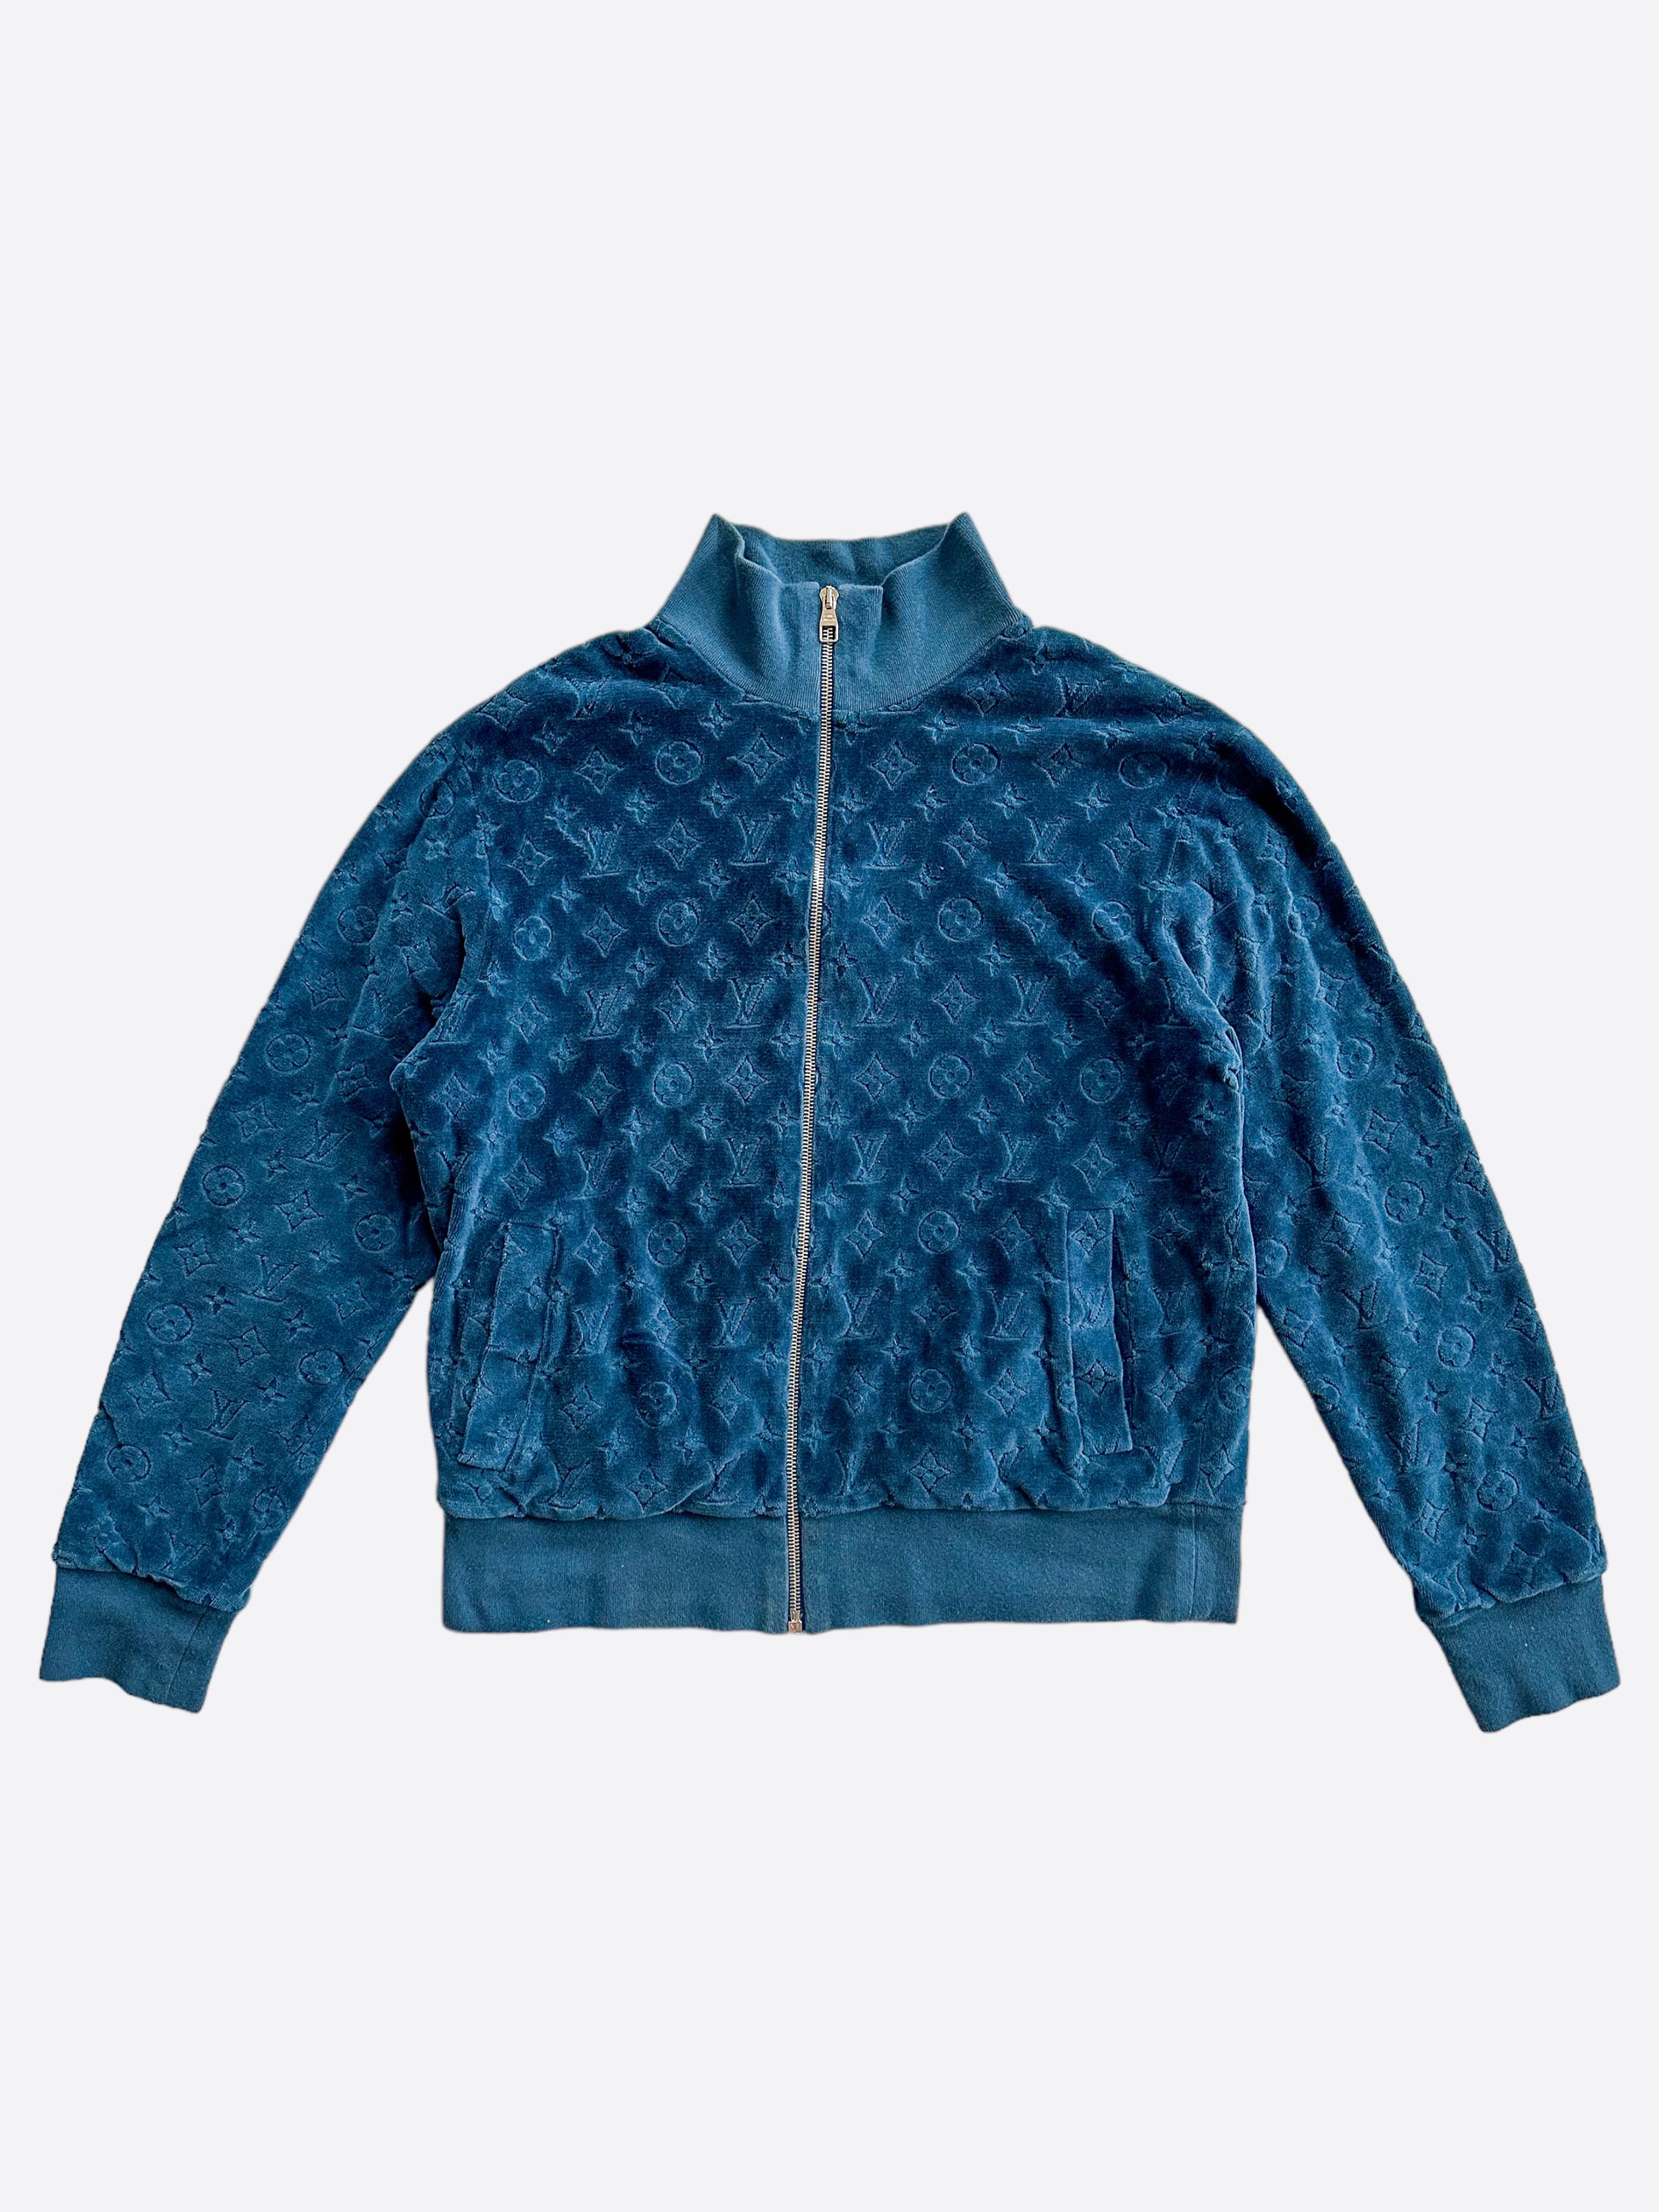 The Louis Vuitton Track Jacket